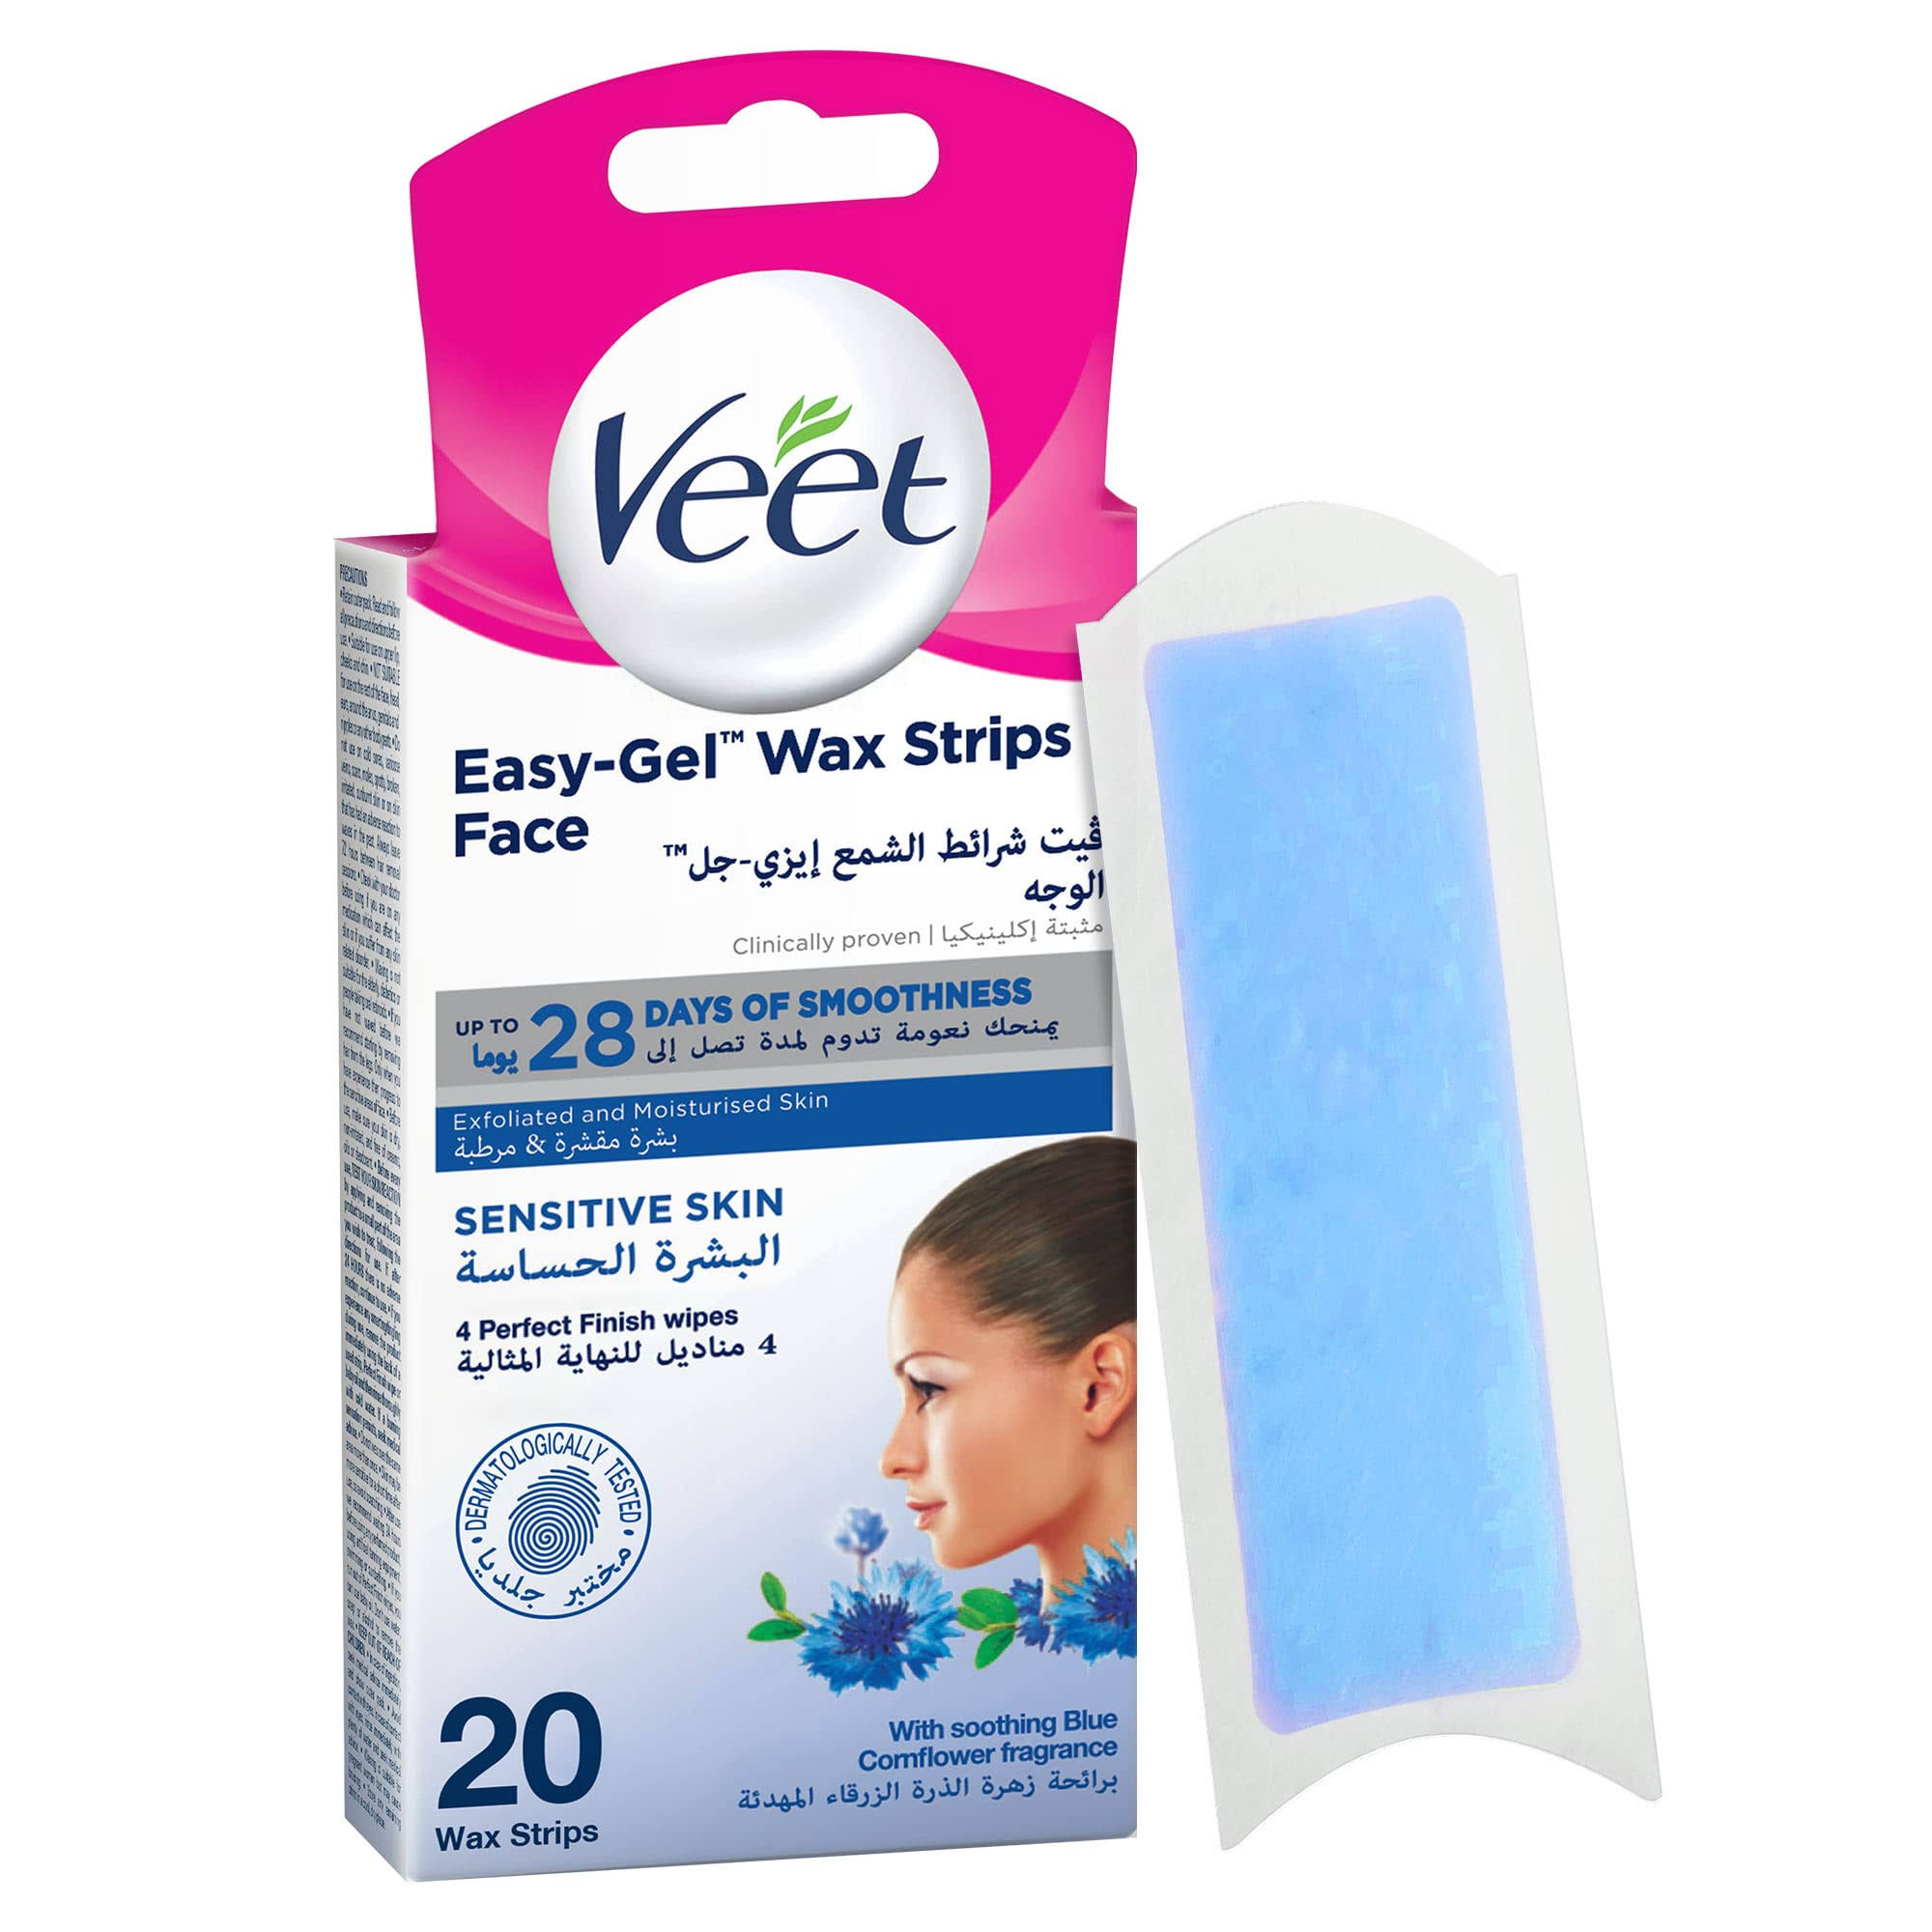 Veet Face Cold Wax Strips For Normal Skin, 10 Double Sided Strips, Pack of 20